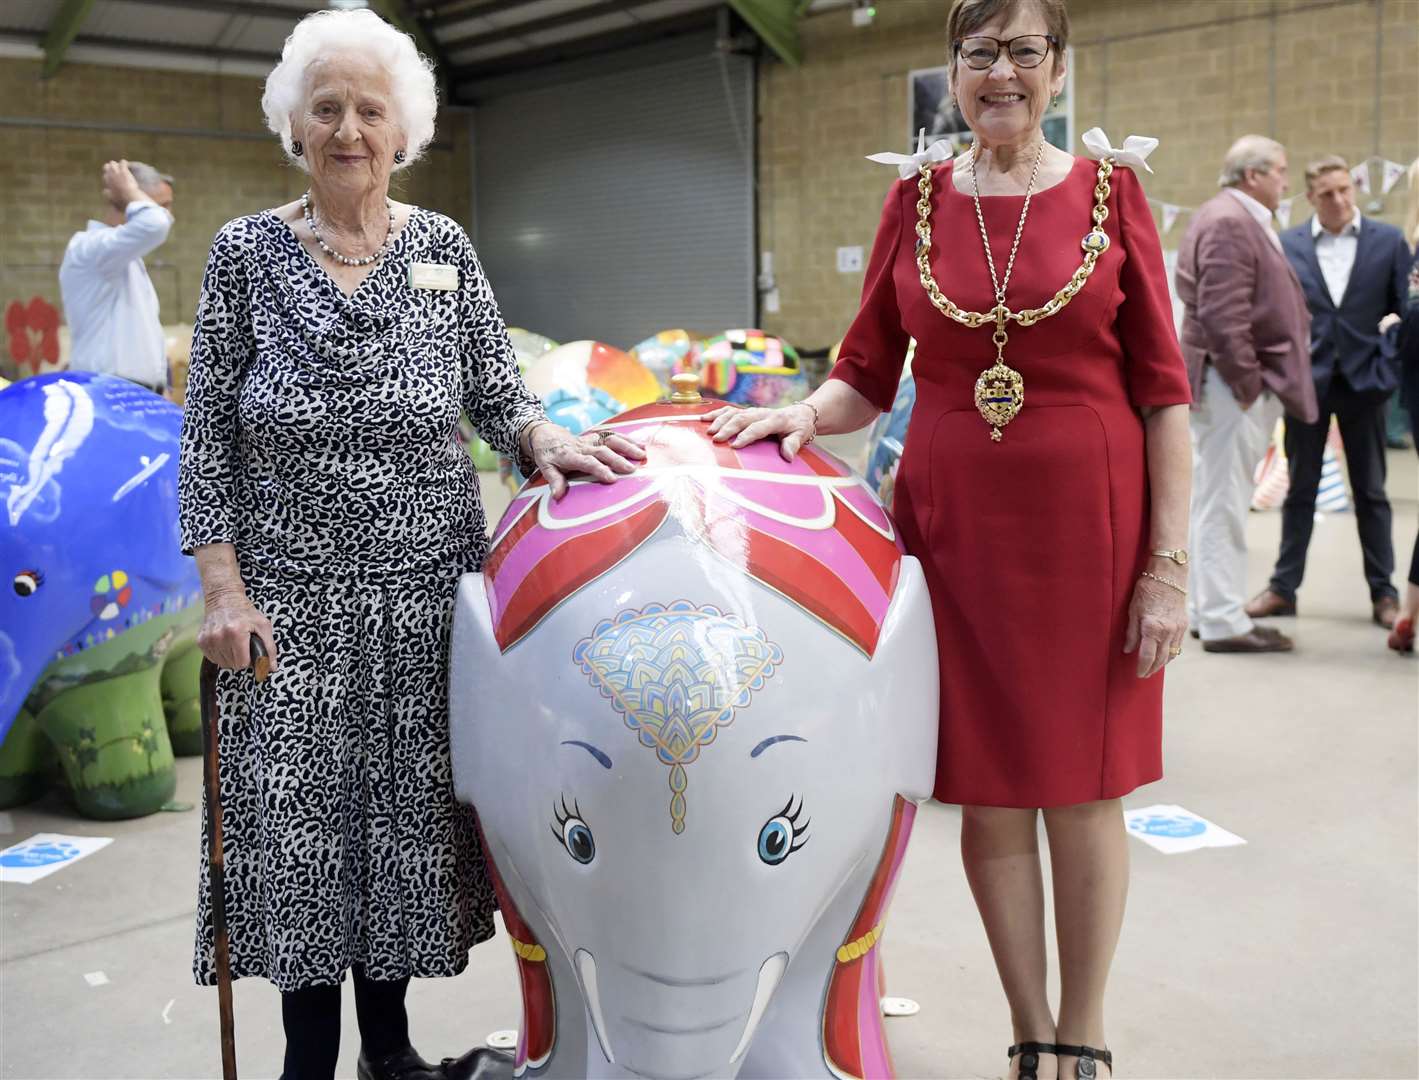 Lady Monckton (patron of Heart of Kent Hospice) with Mayor of Maidstone, Cllr Fay Gooch. Pictures: Barry Goodwin